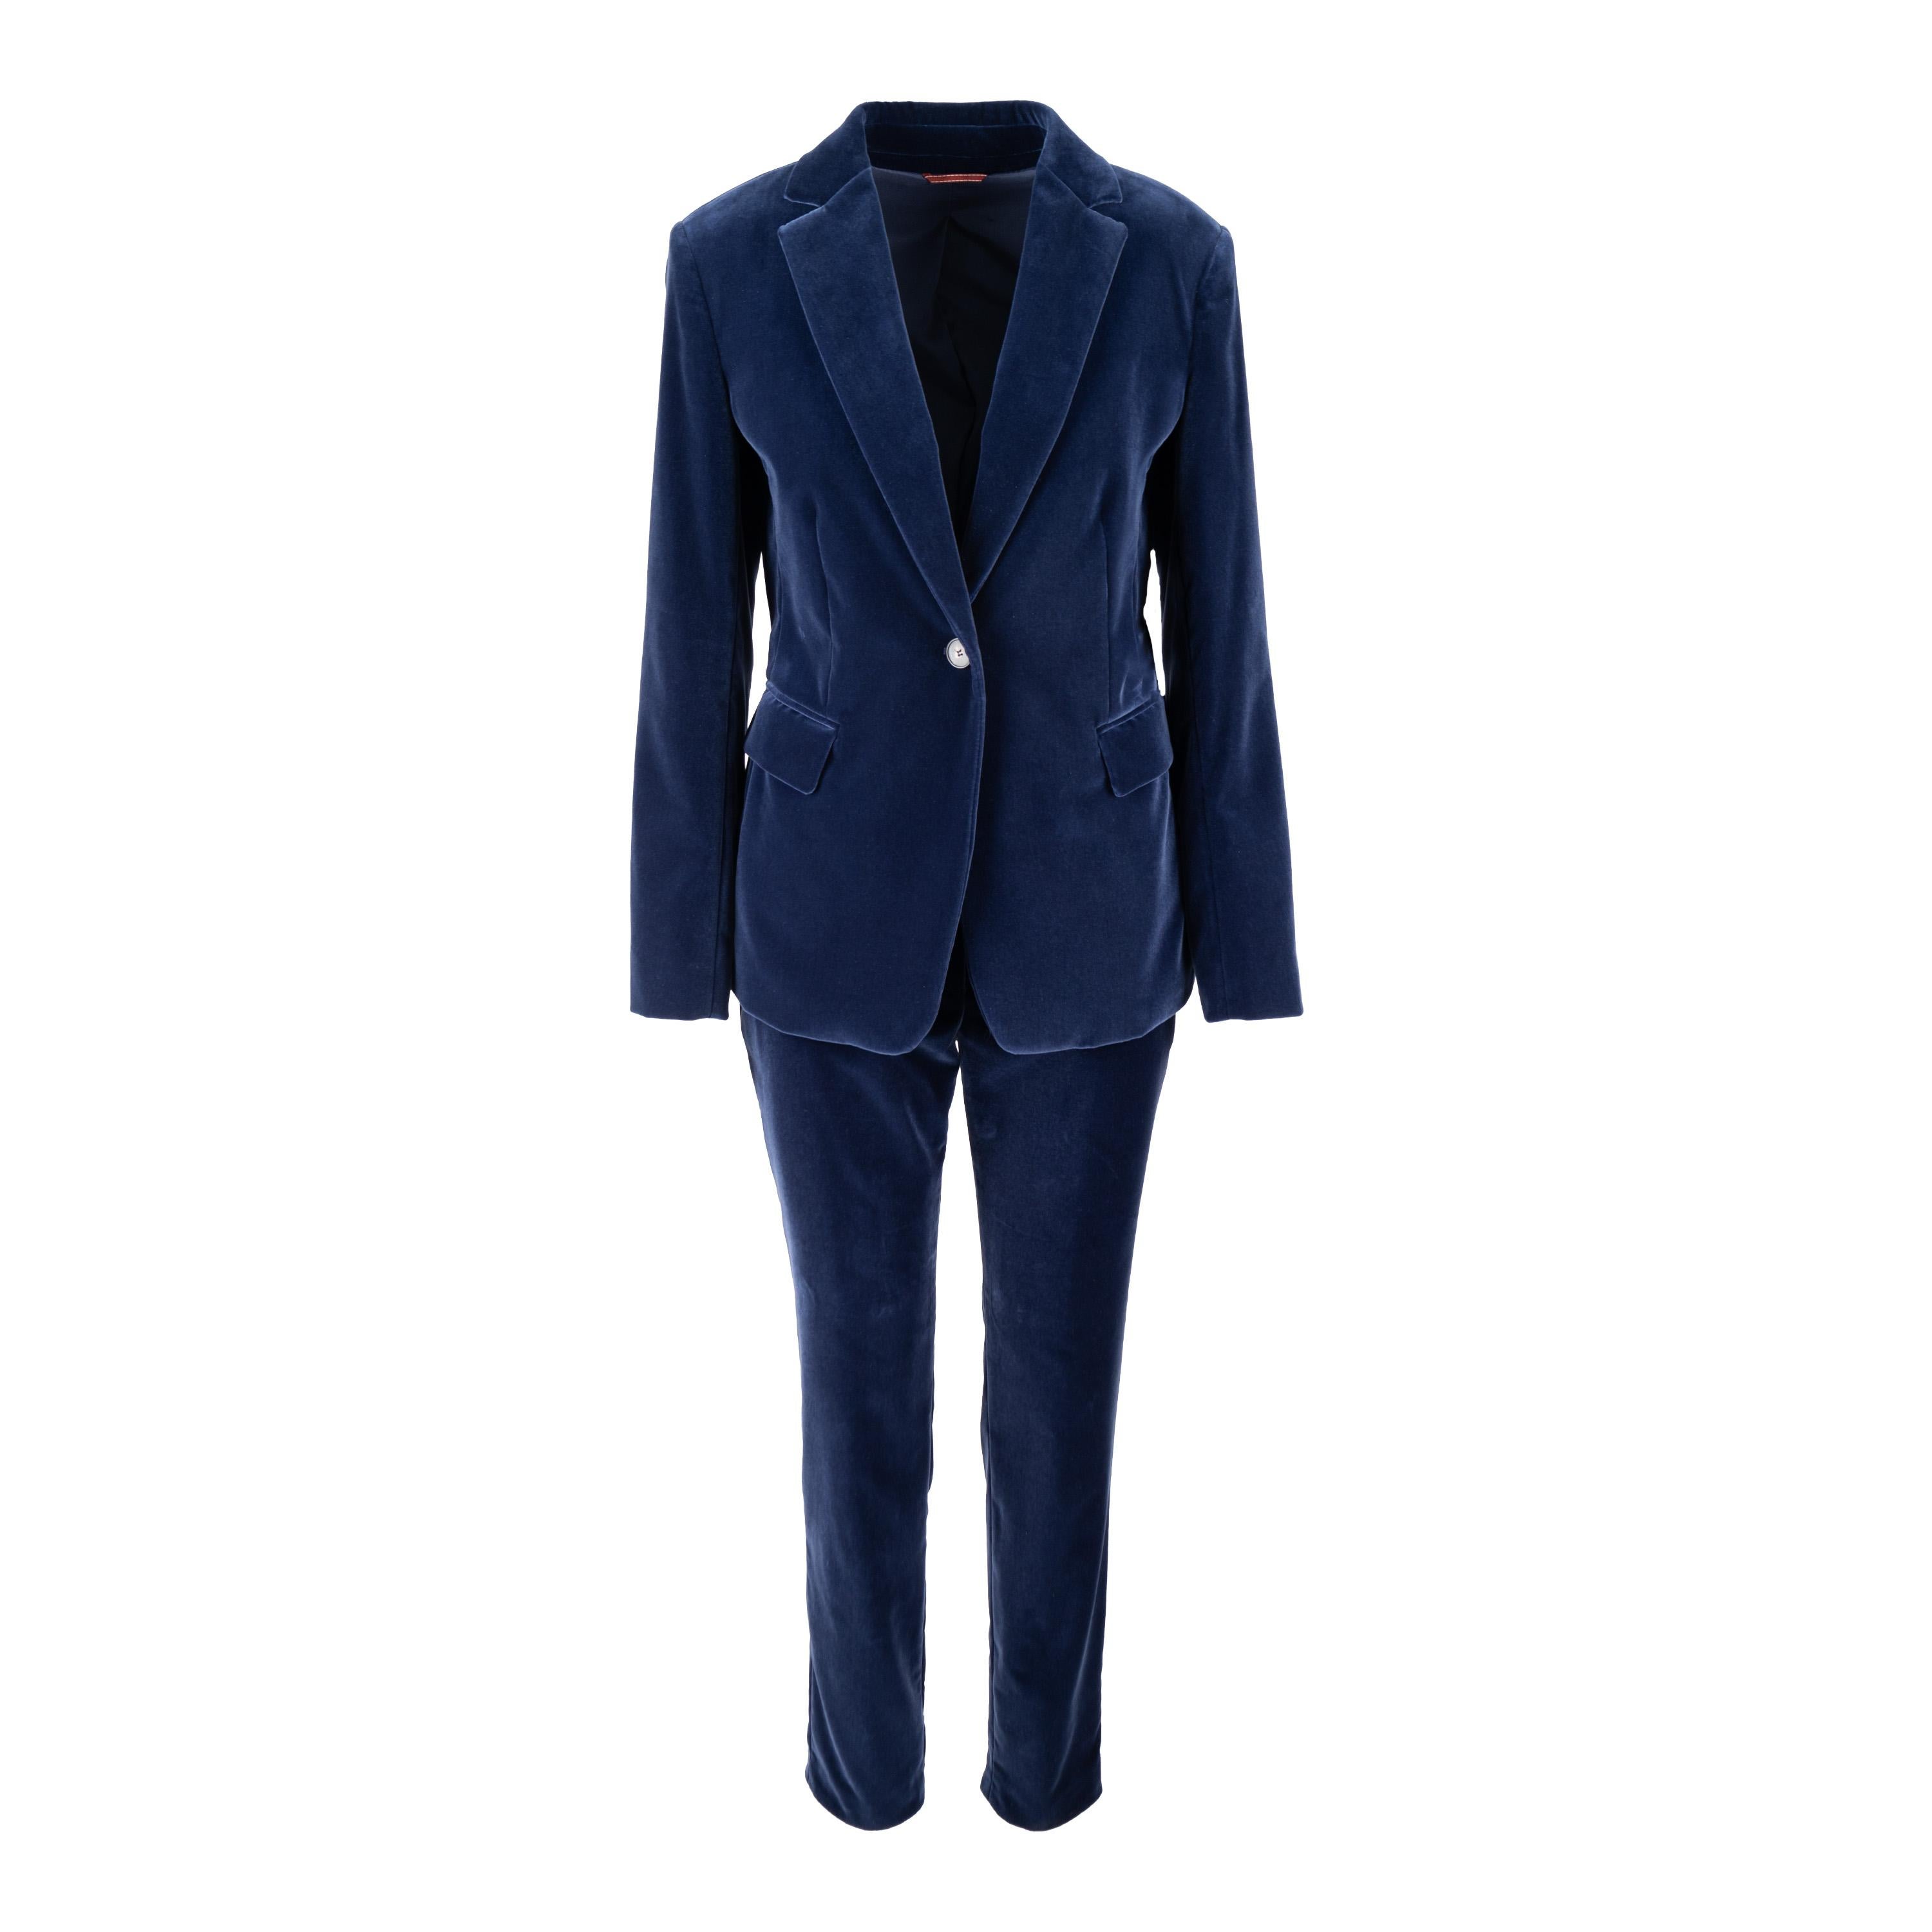 This sleek Max Mara velvet suit features a one-breasted blazer crafted from soft cotton blend velvet, a lapel collar, welt pockets and a single button closure. The trousers have front zipper closure and two side pockets.  